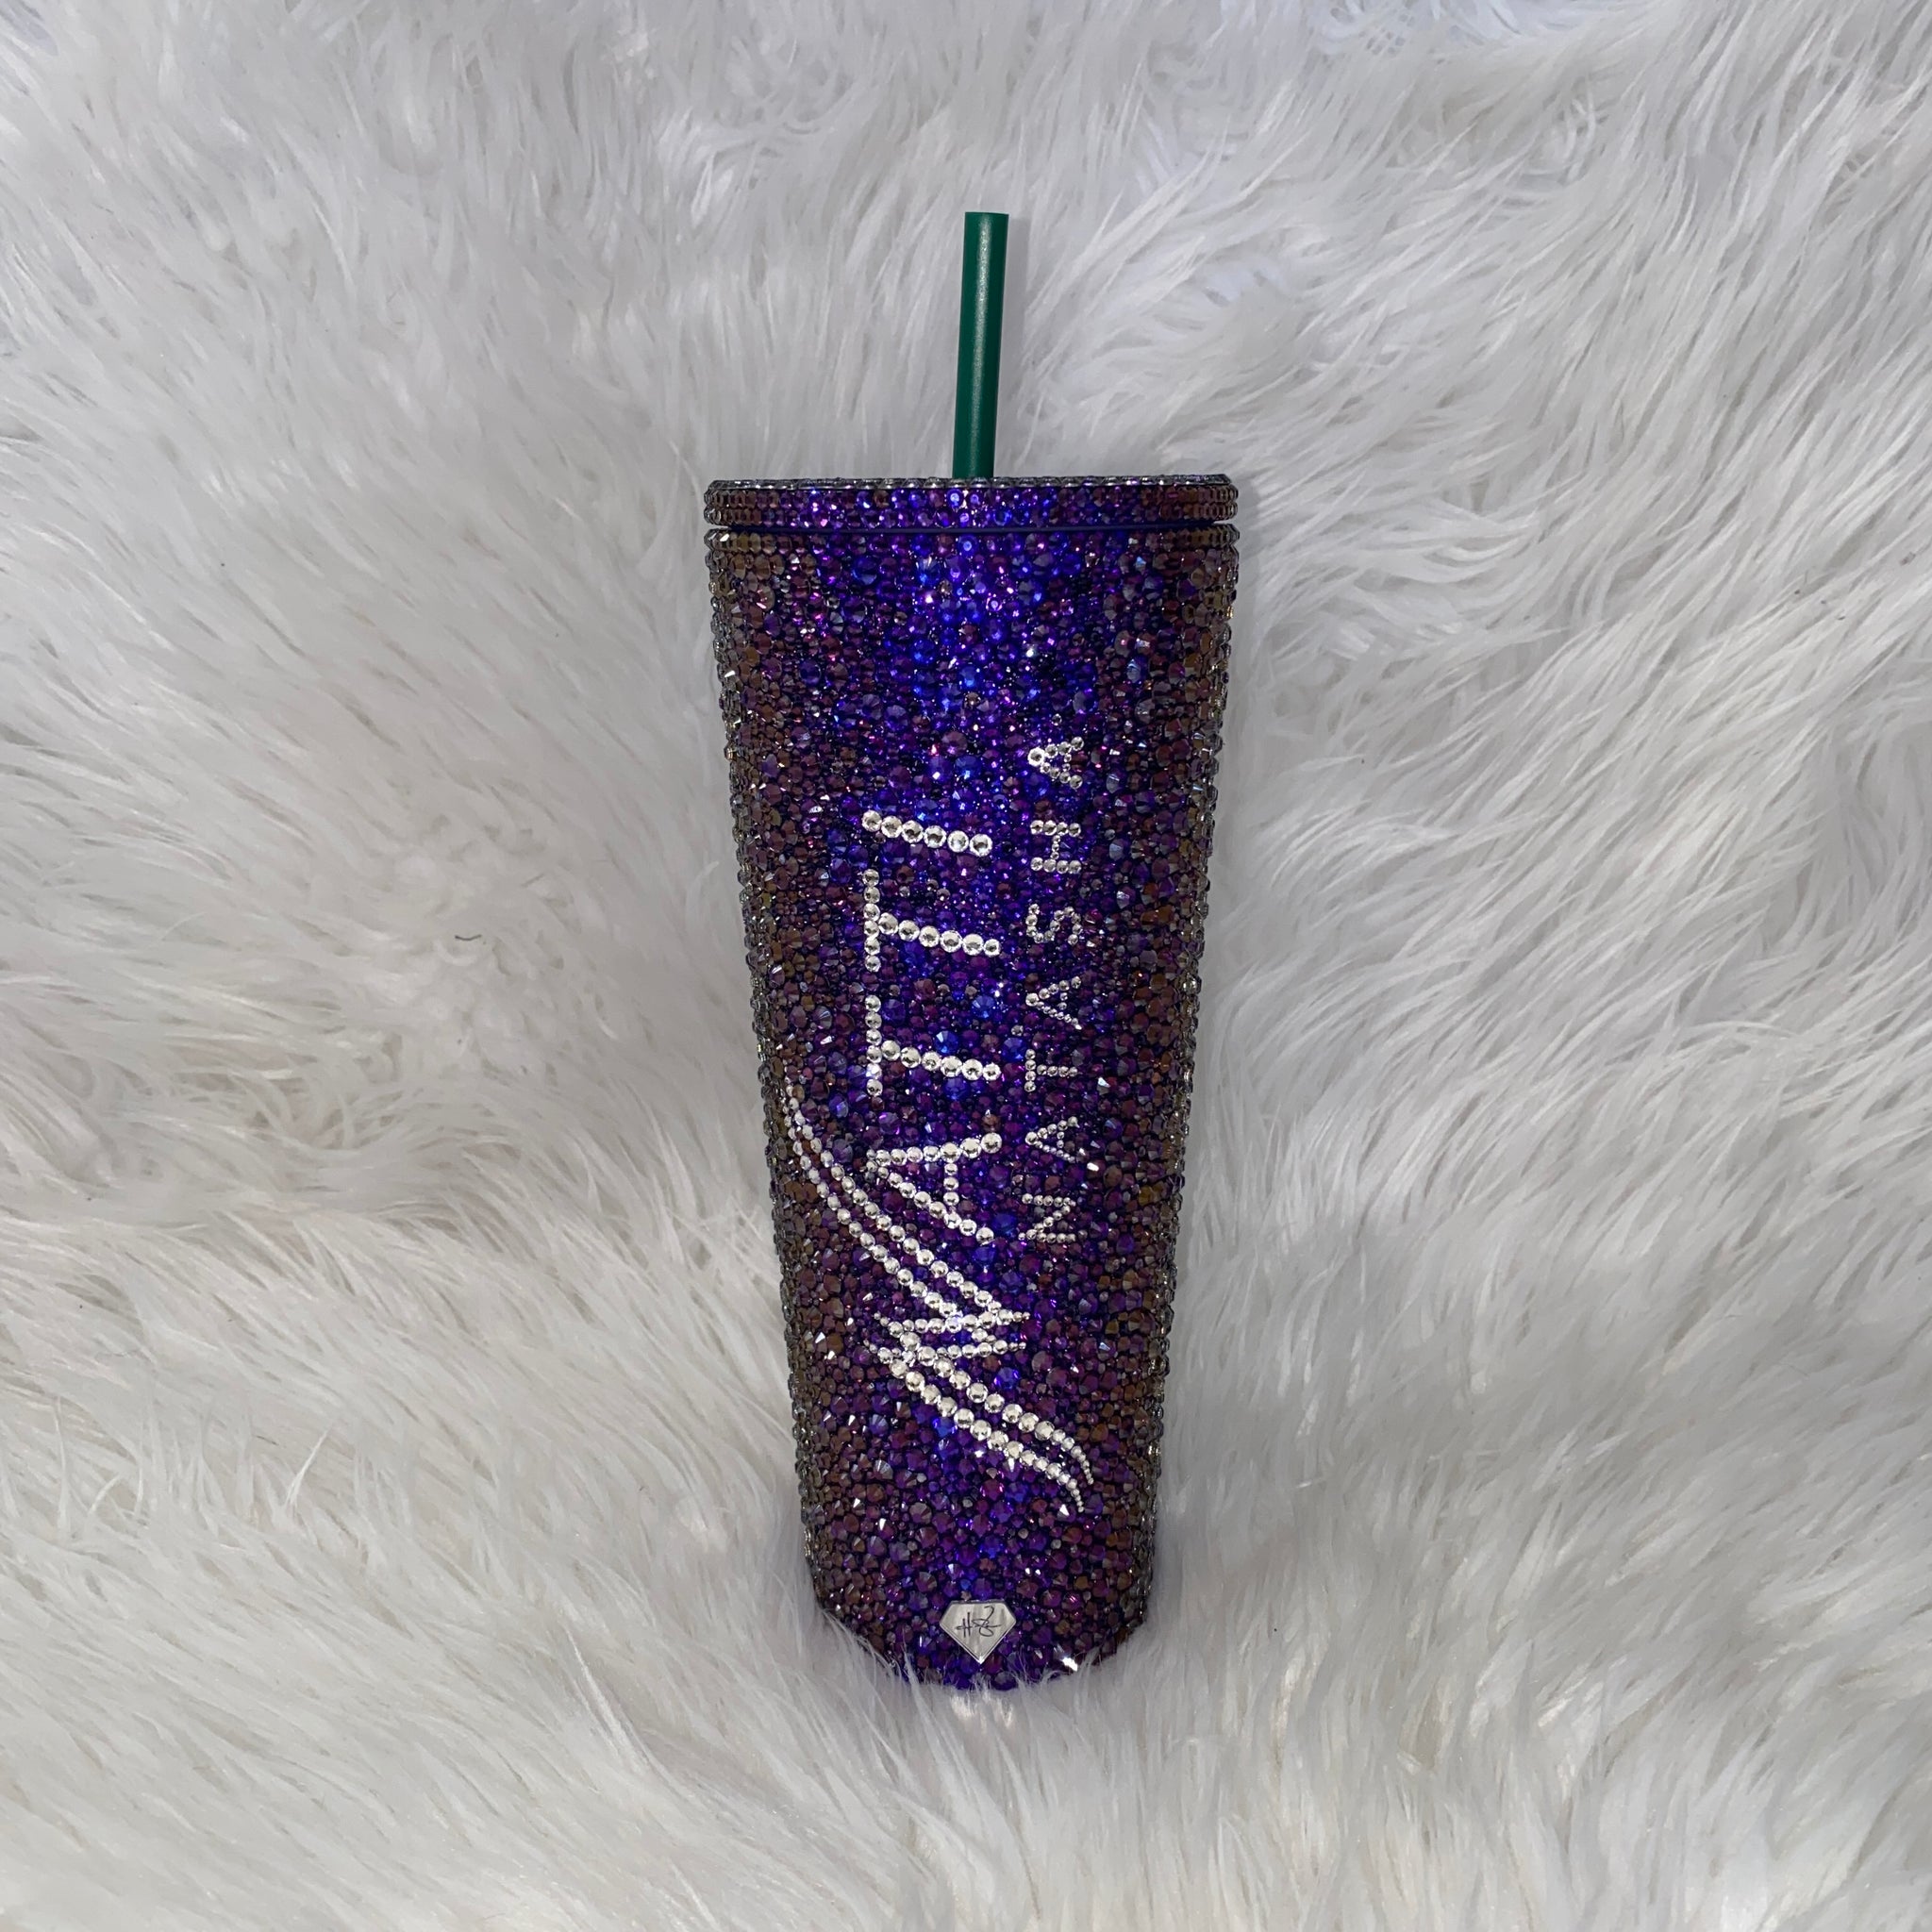 She's a BEAUTY! Hands down my NEW FAVORITE TUMBLER! @BrüMate #cup #tum